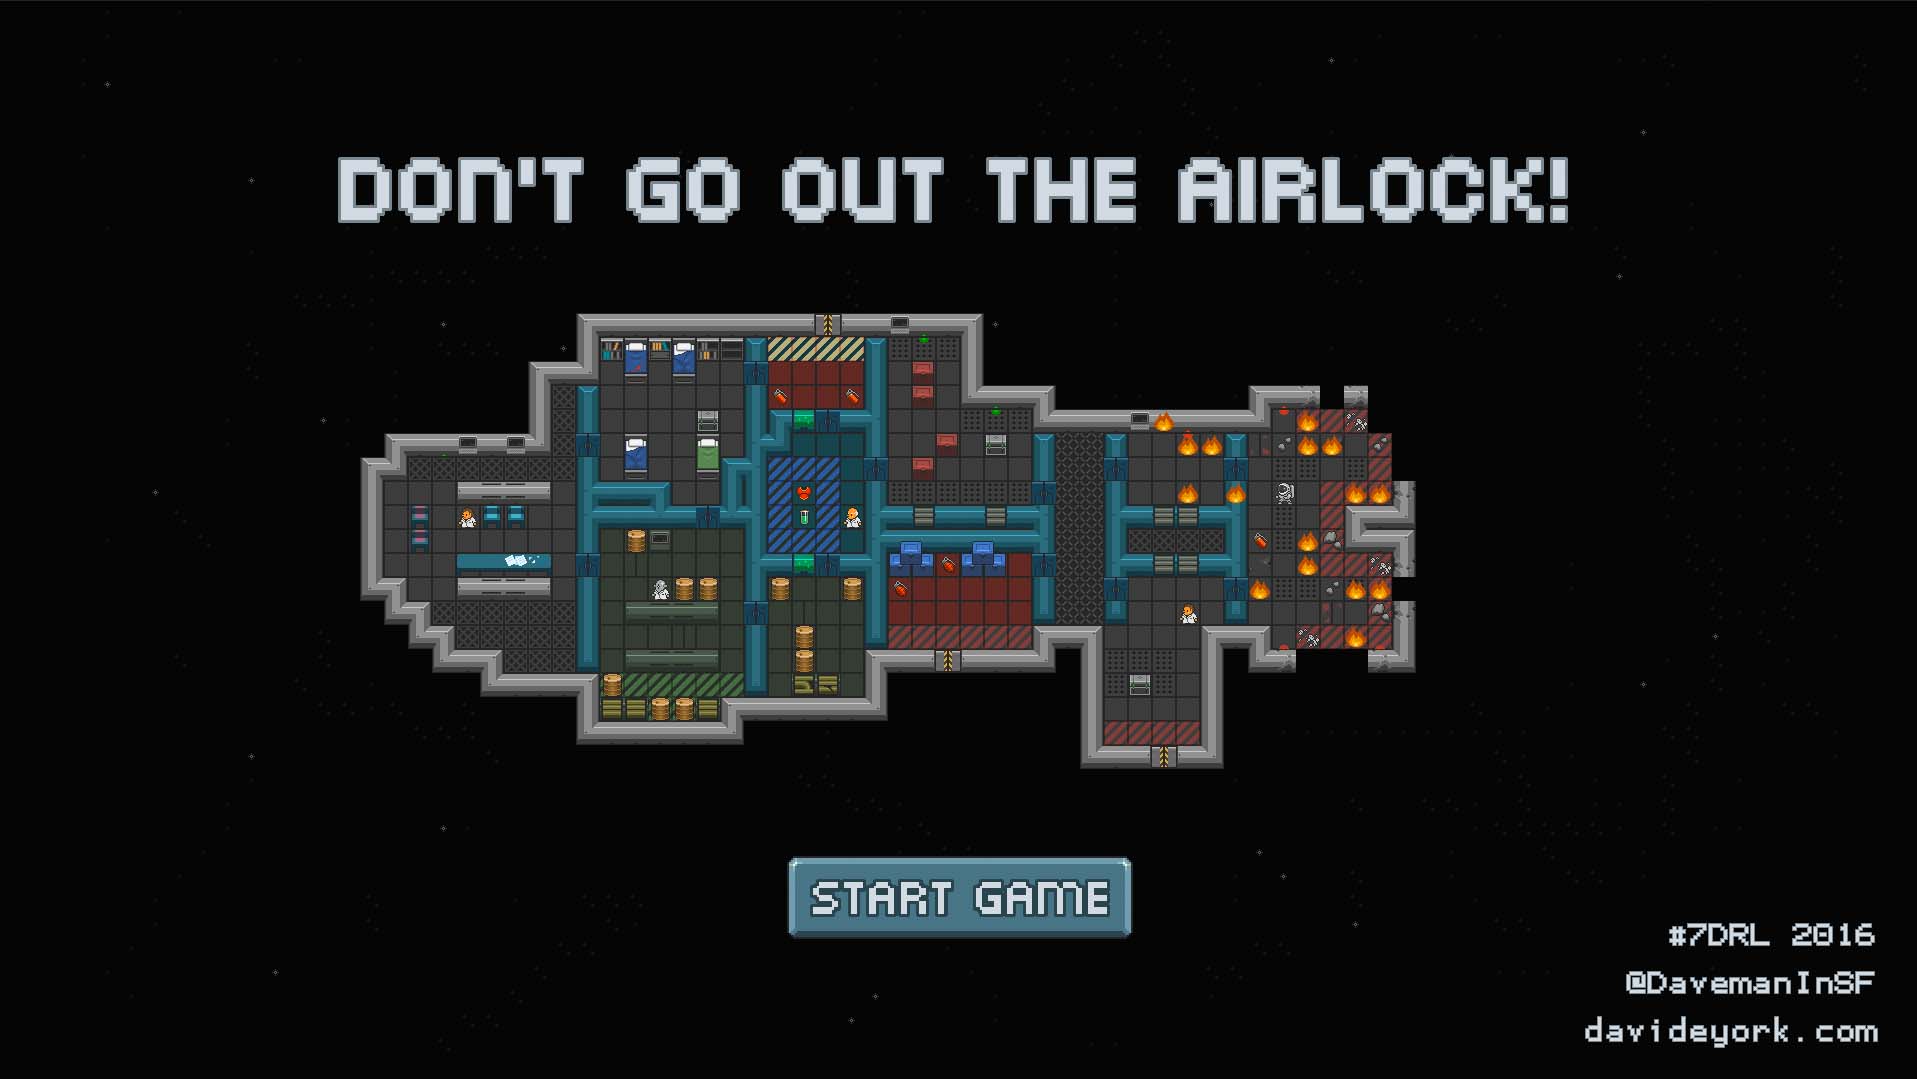 Don't go out the Airlock intro